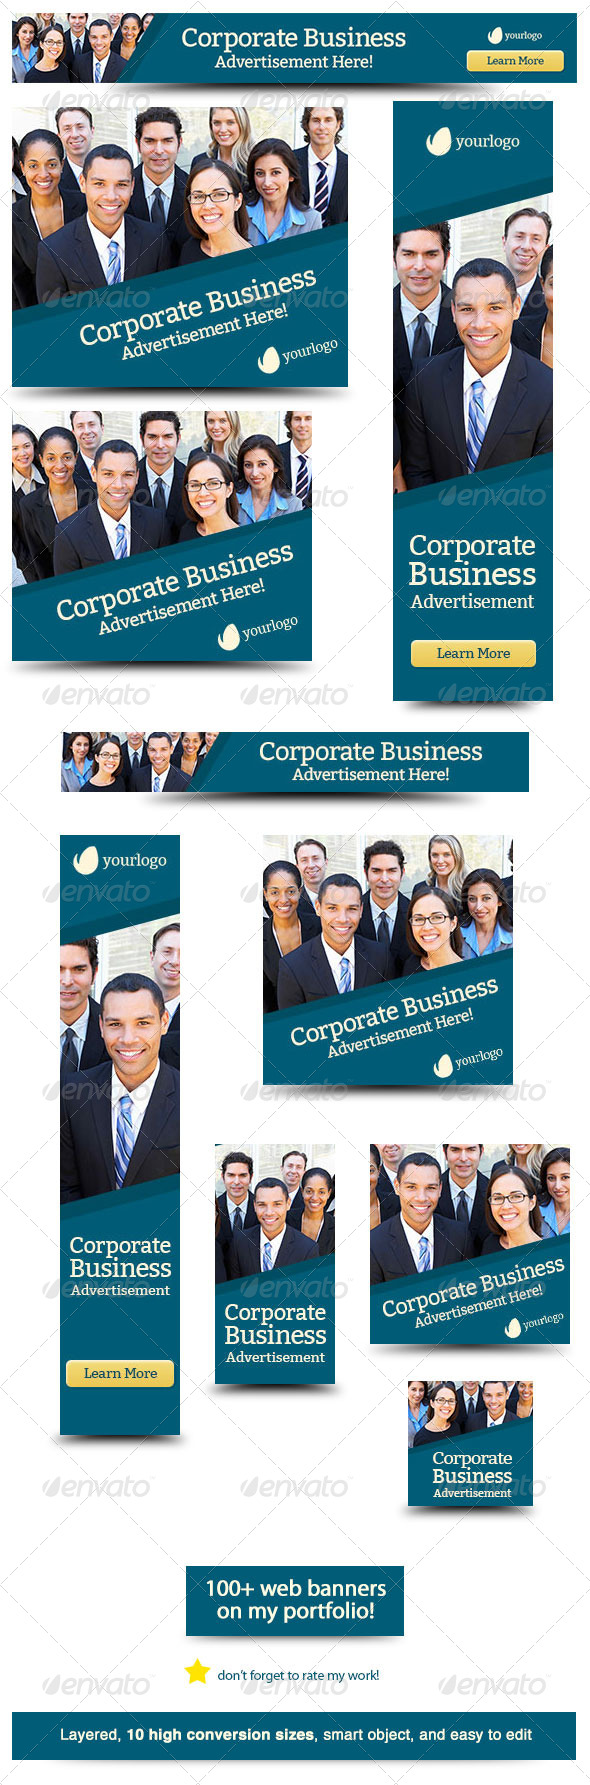 Corporate Web Banner Design Template 32 (Banners & Ads)